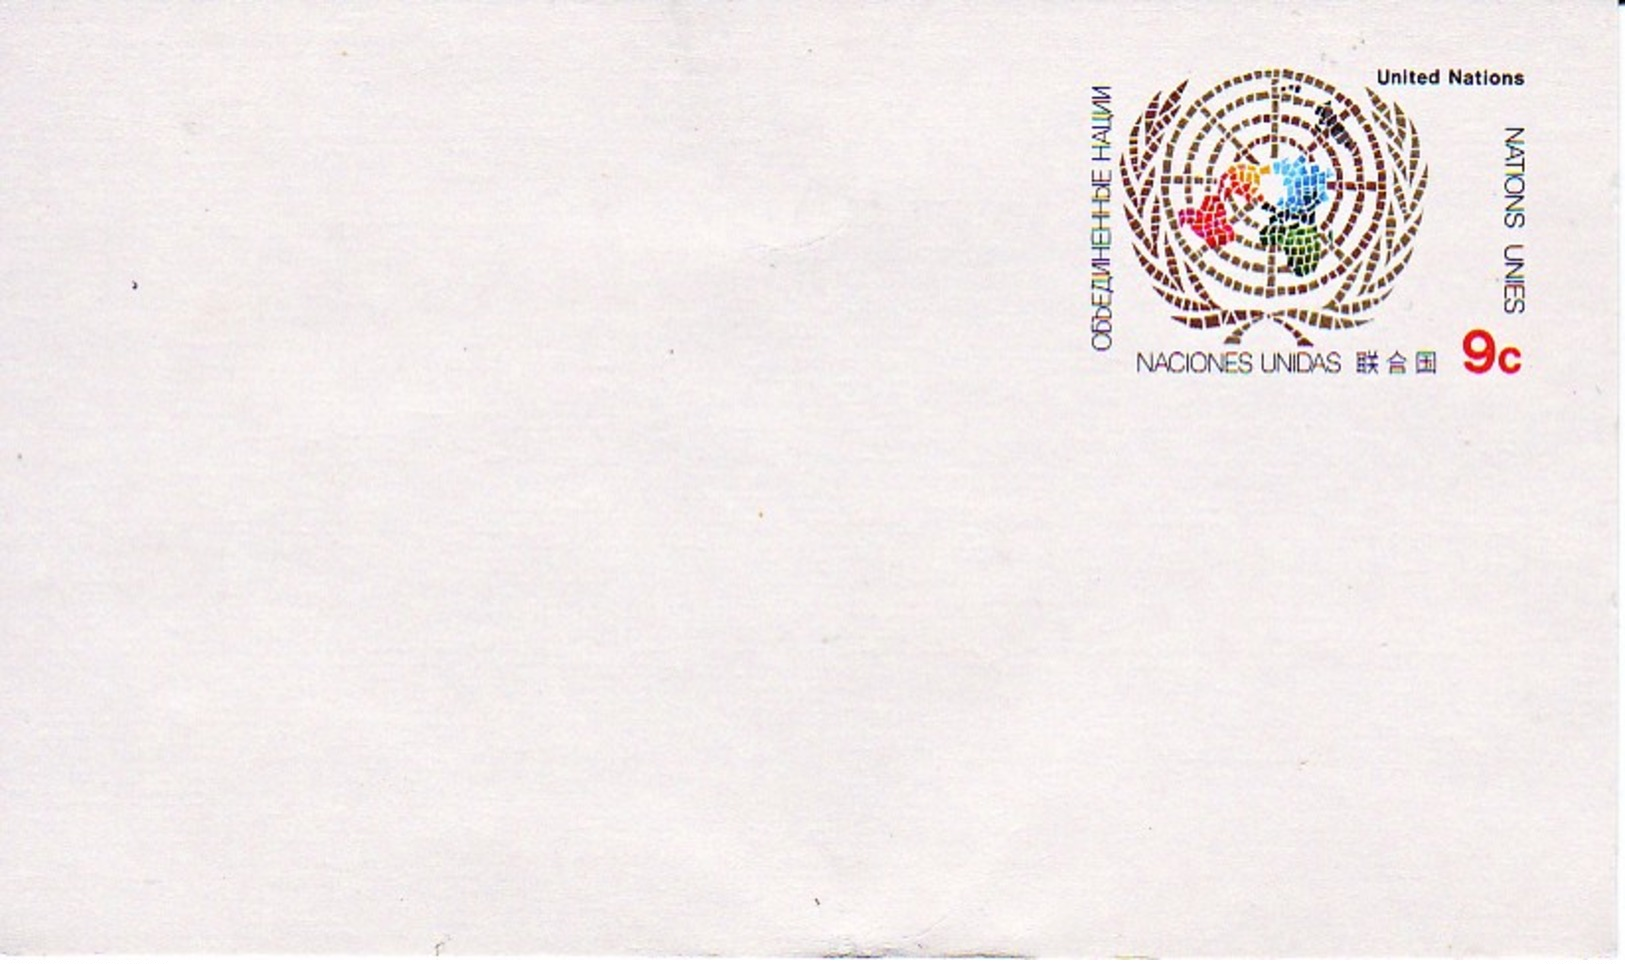 NATIONS-UNIES : Entier Postal Neuf - VN